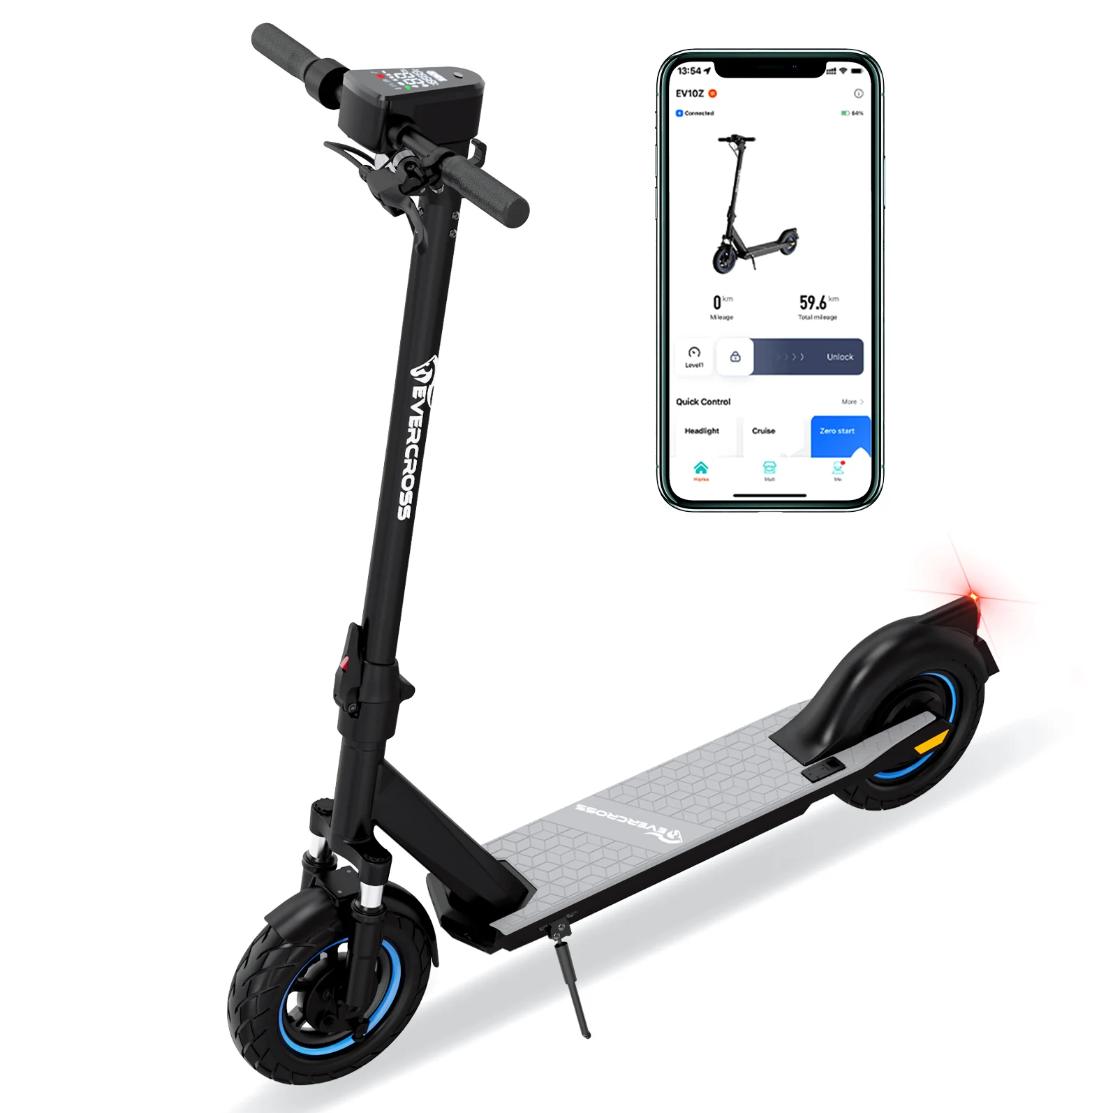 evercross ev10z electric foot scooter product image showing scooter parked and mobile phone app display